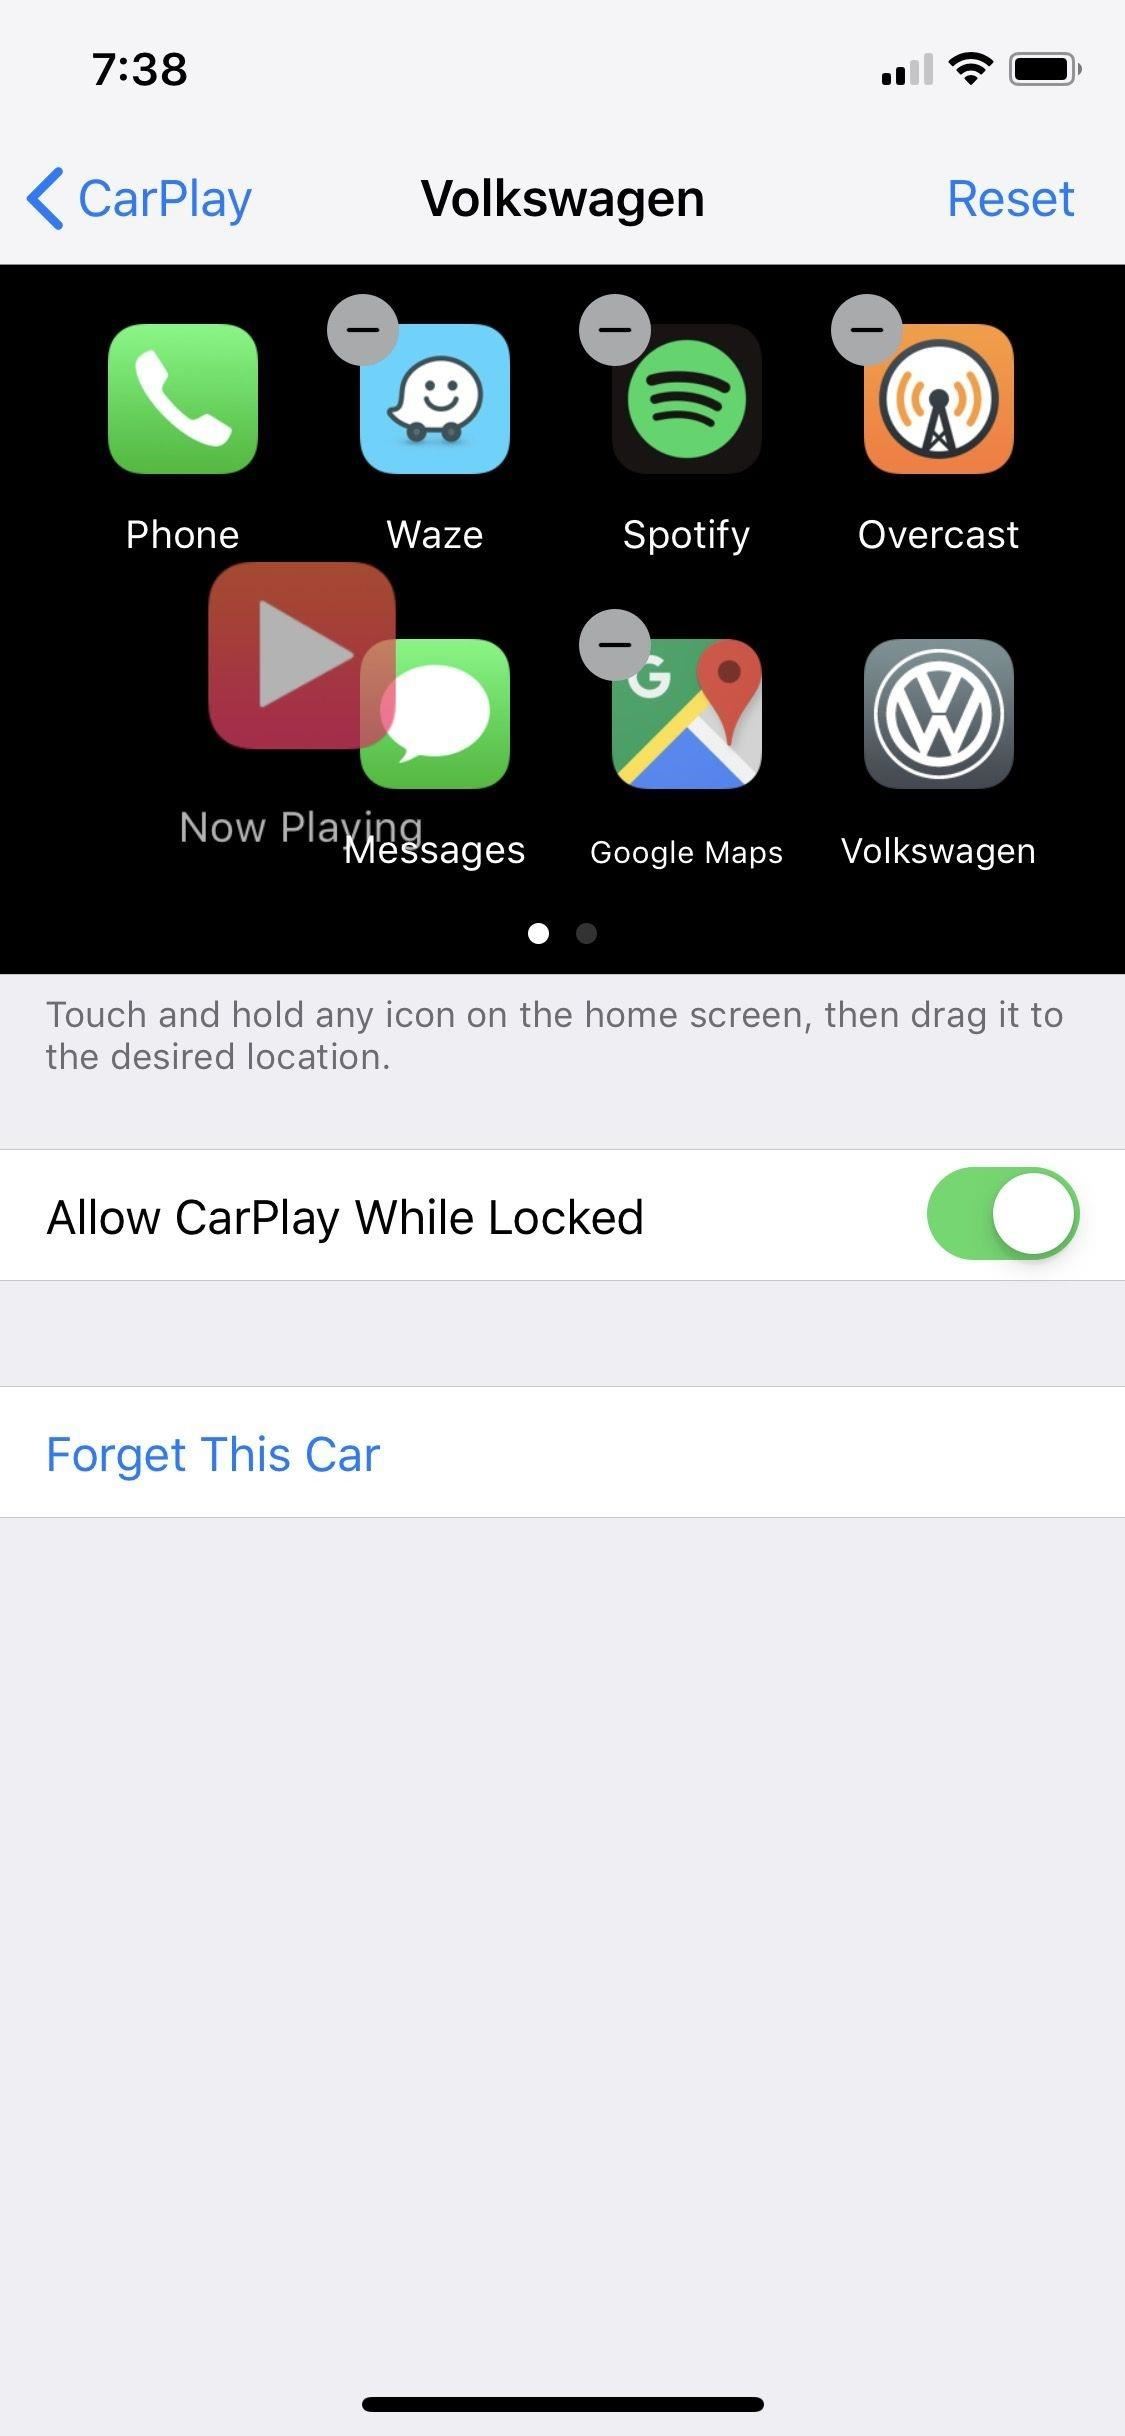 How to Rearrange Apps on Your CarPlay Screen for Quicker Access to Your Favorite Services